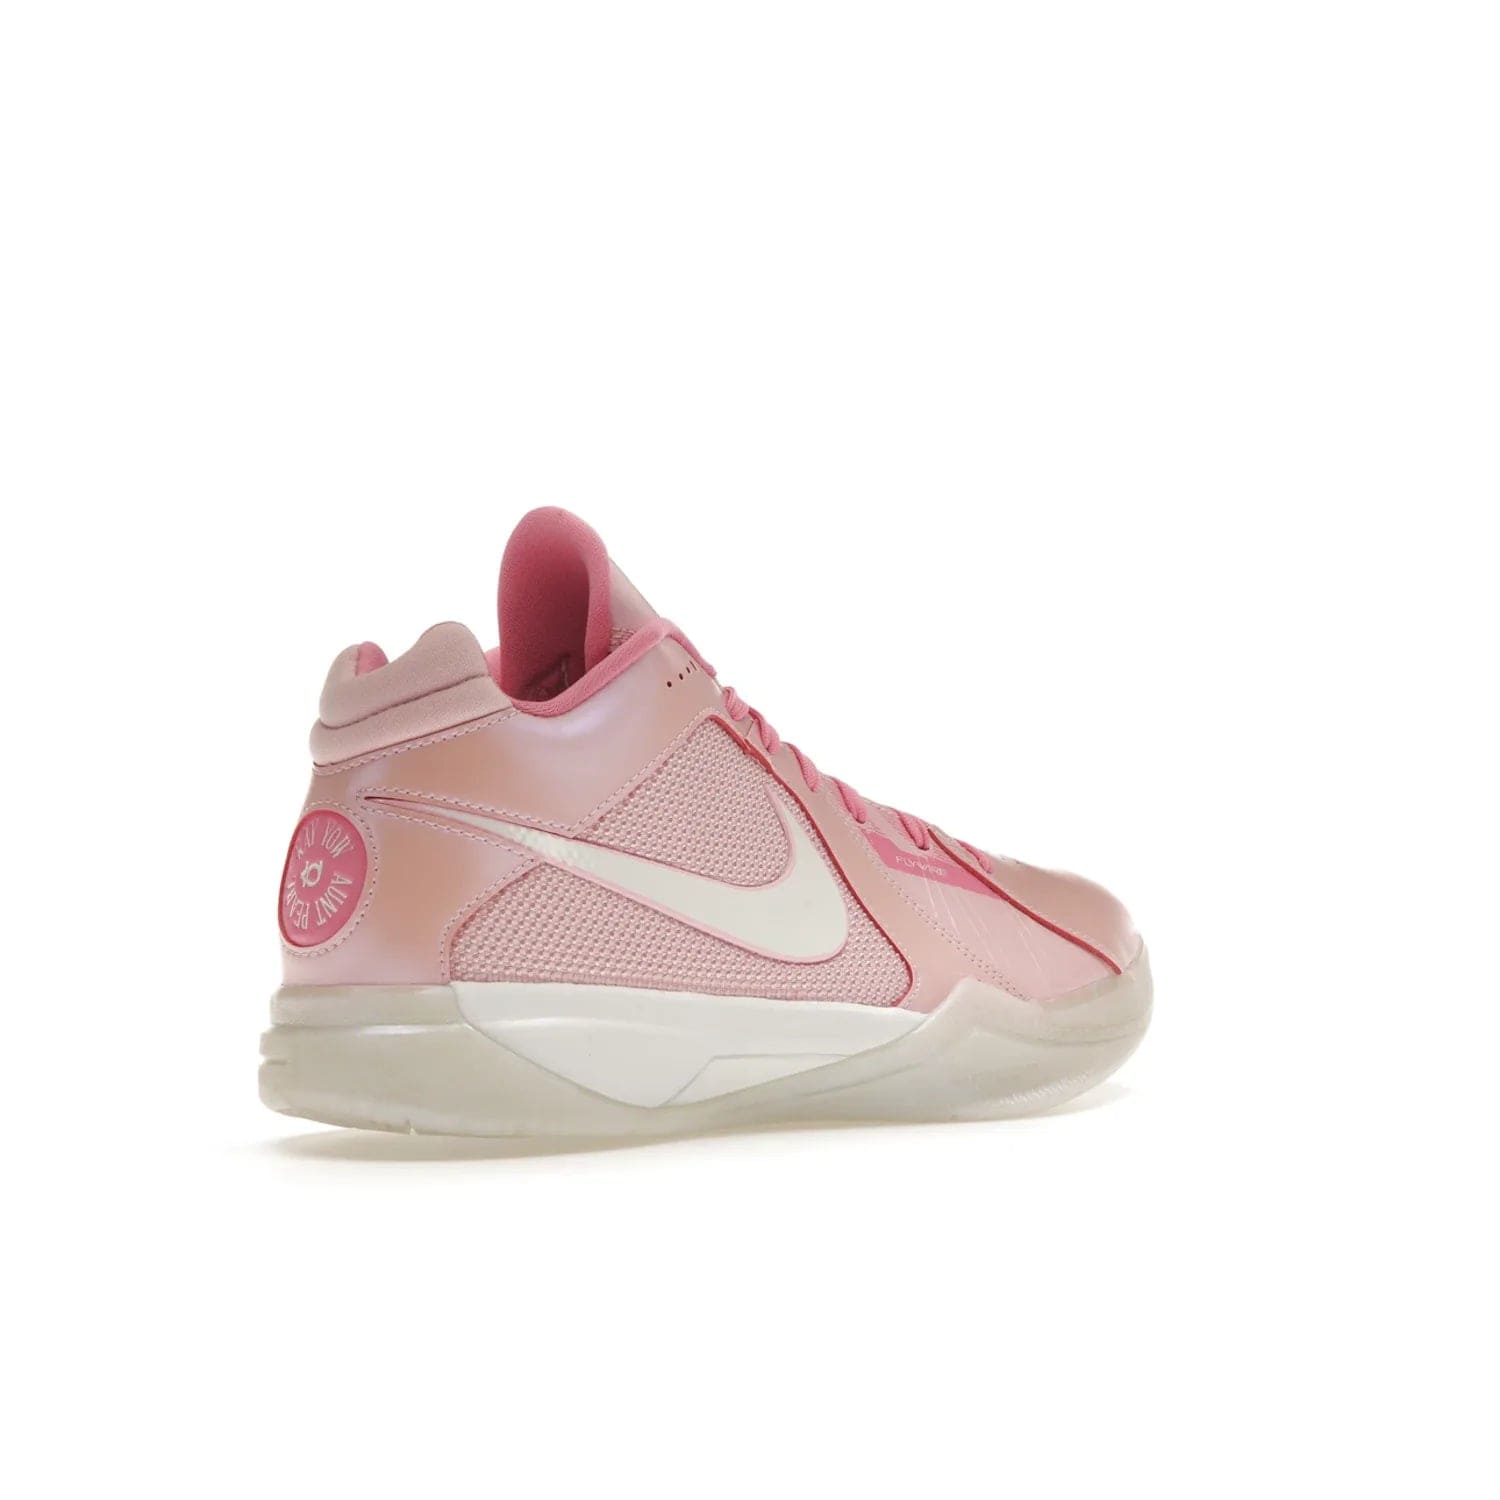 Nike KD 3 Aunt Pearl - Image 33 - Only at www.BallersClubKickz.com - Introducing the Nike KD 3 Aunt Pearl. Featuring a bold Medium Soft Pink, White, & Lotus Pink colorway. Get ready to stand out this October 15th.